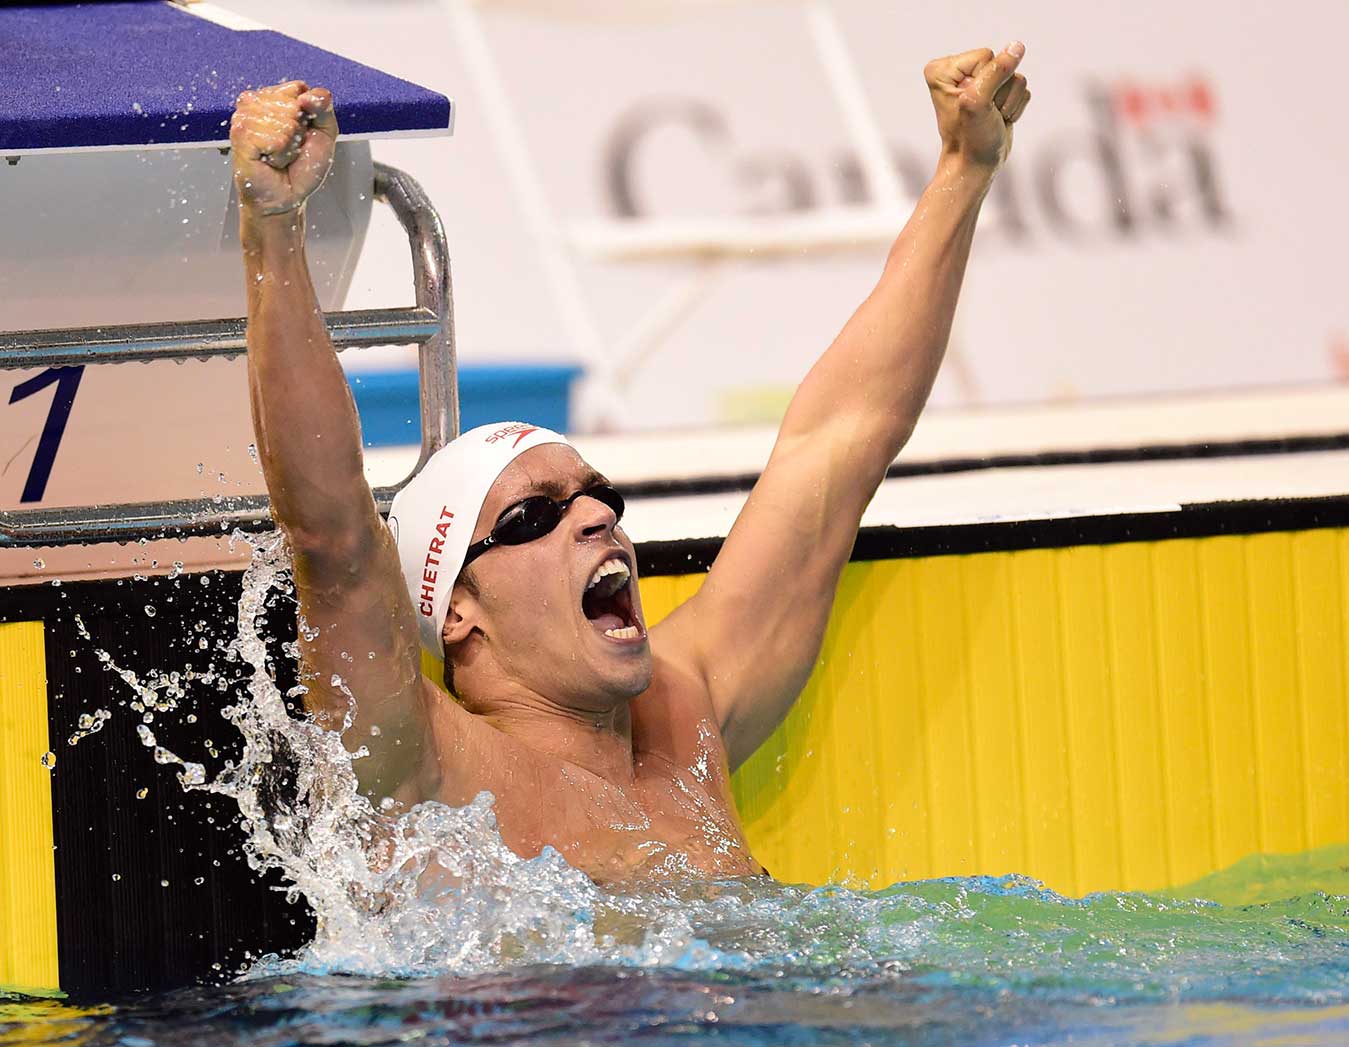 Local swimmer Zack Chetrat reacts after winning 200m butterfly bronze at the Toronto 2015 Pan American Games.